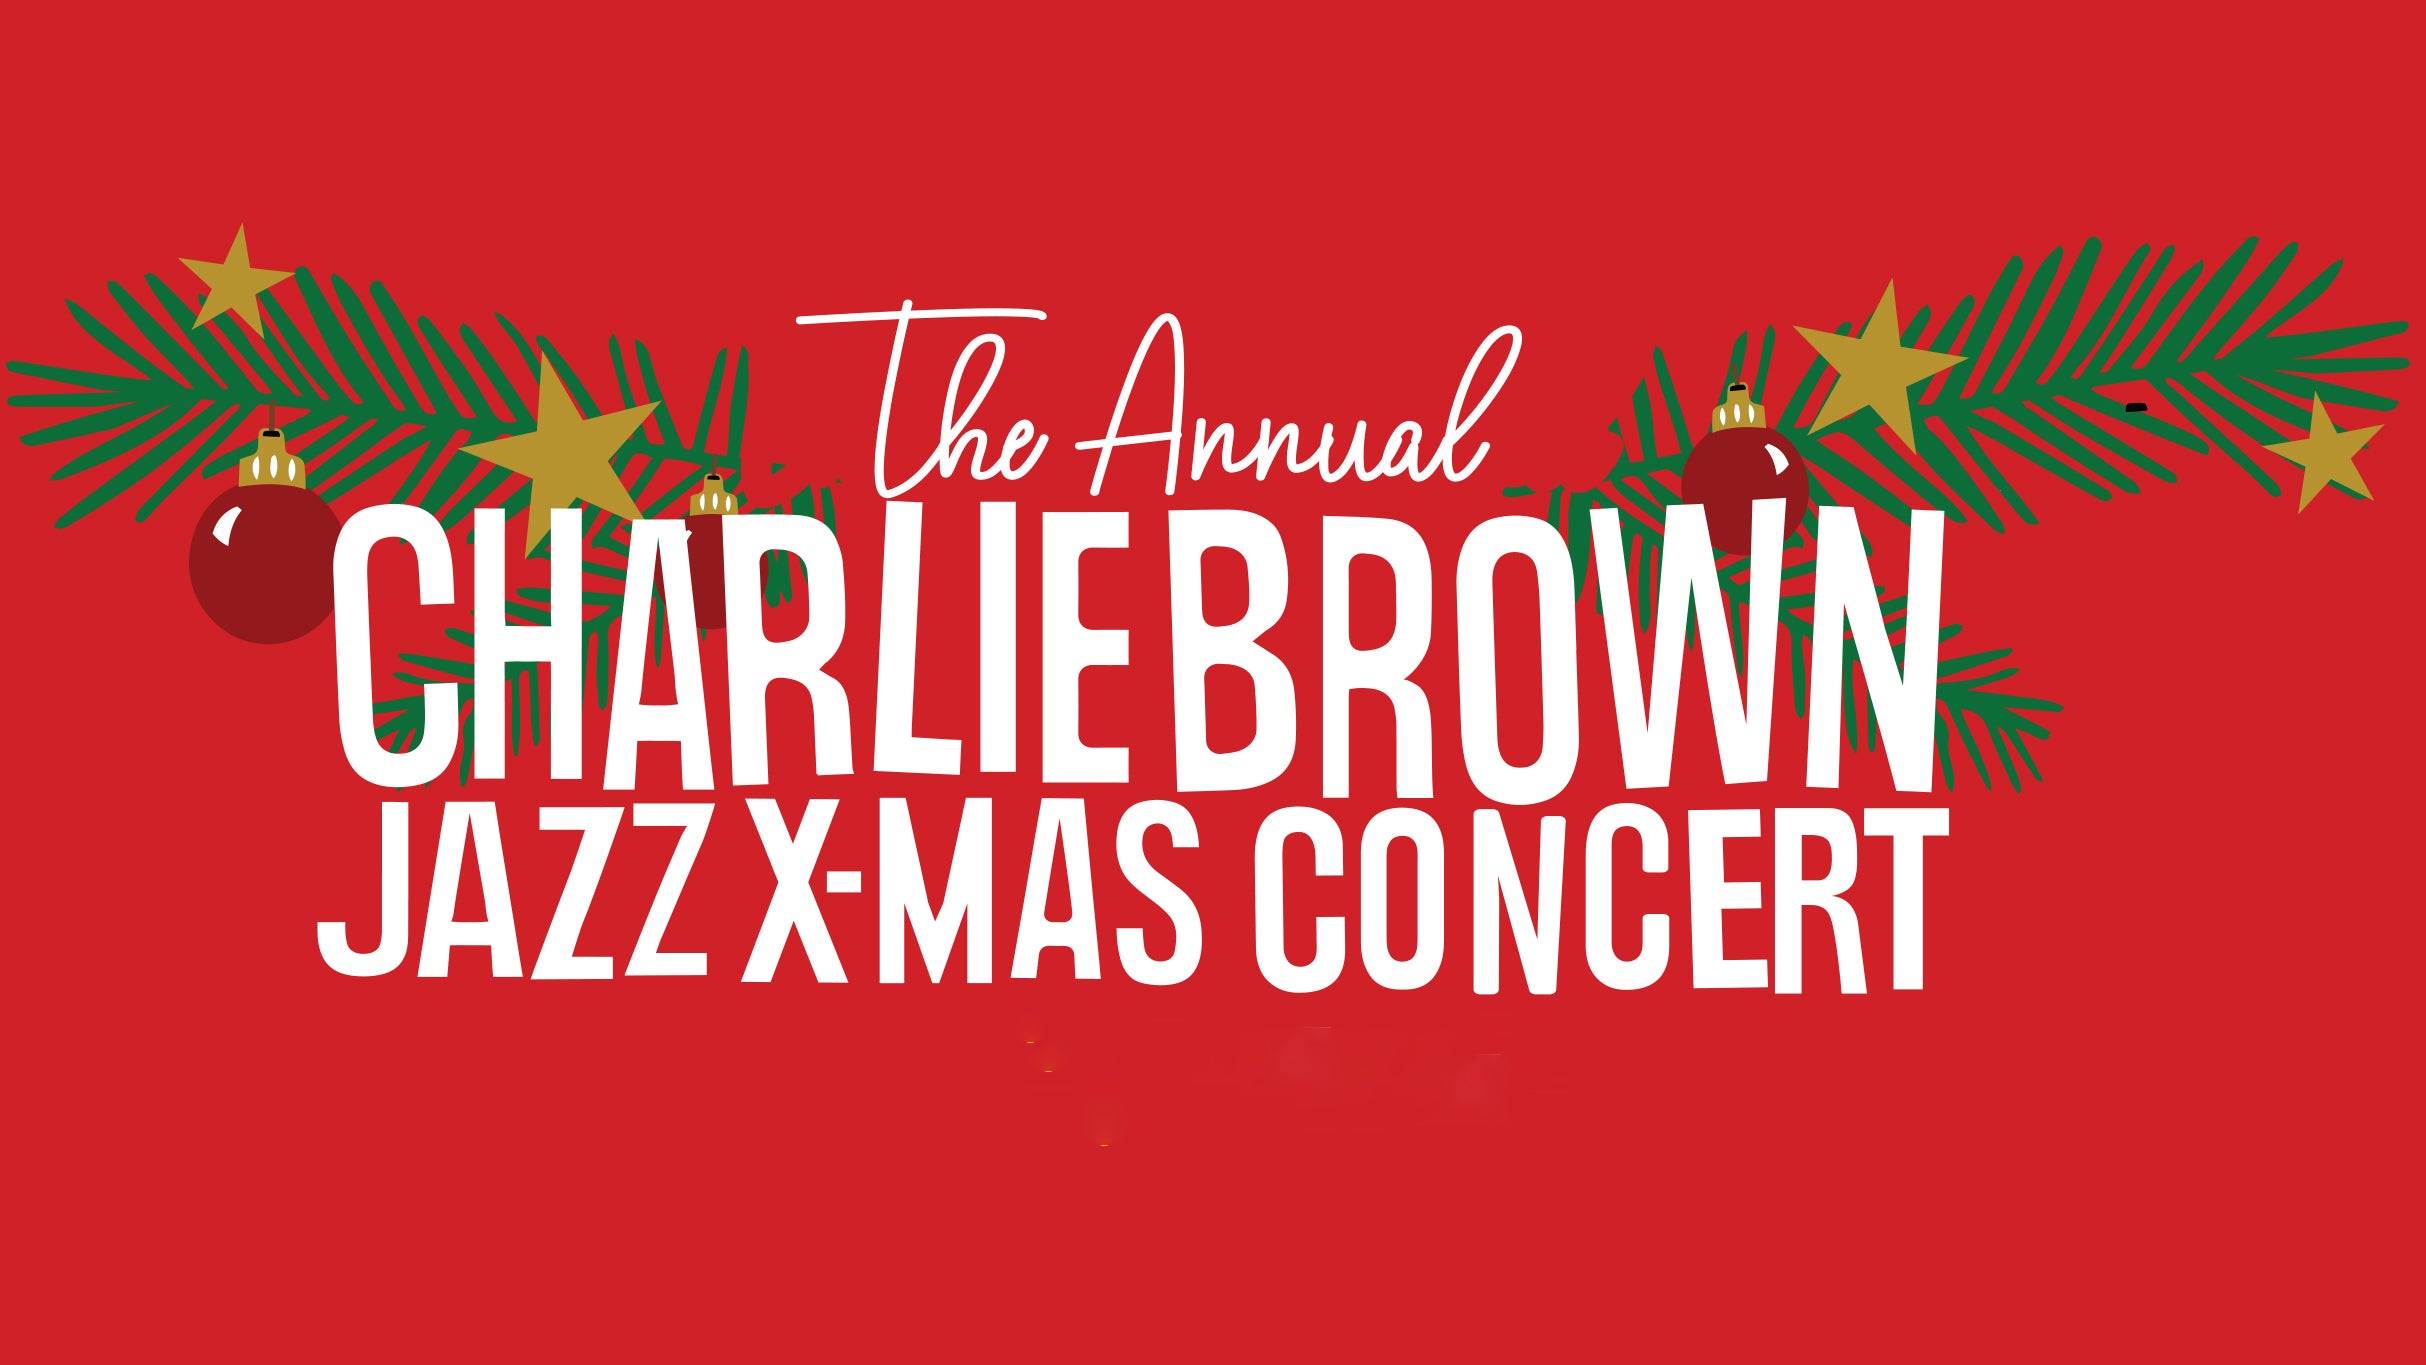 A Charlie Brown Jazz Christmas presale code for your tickets in Mobile